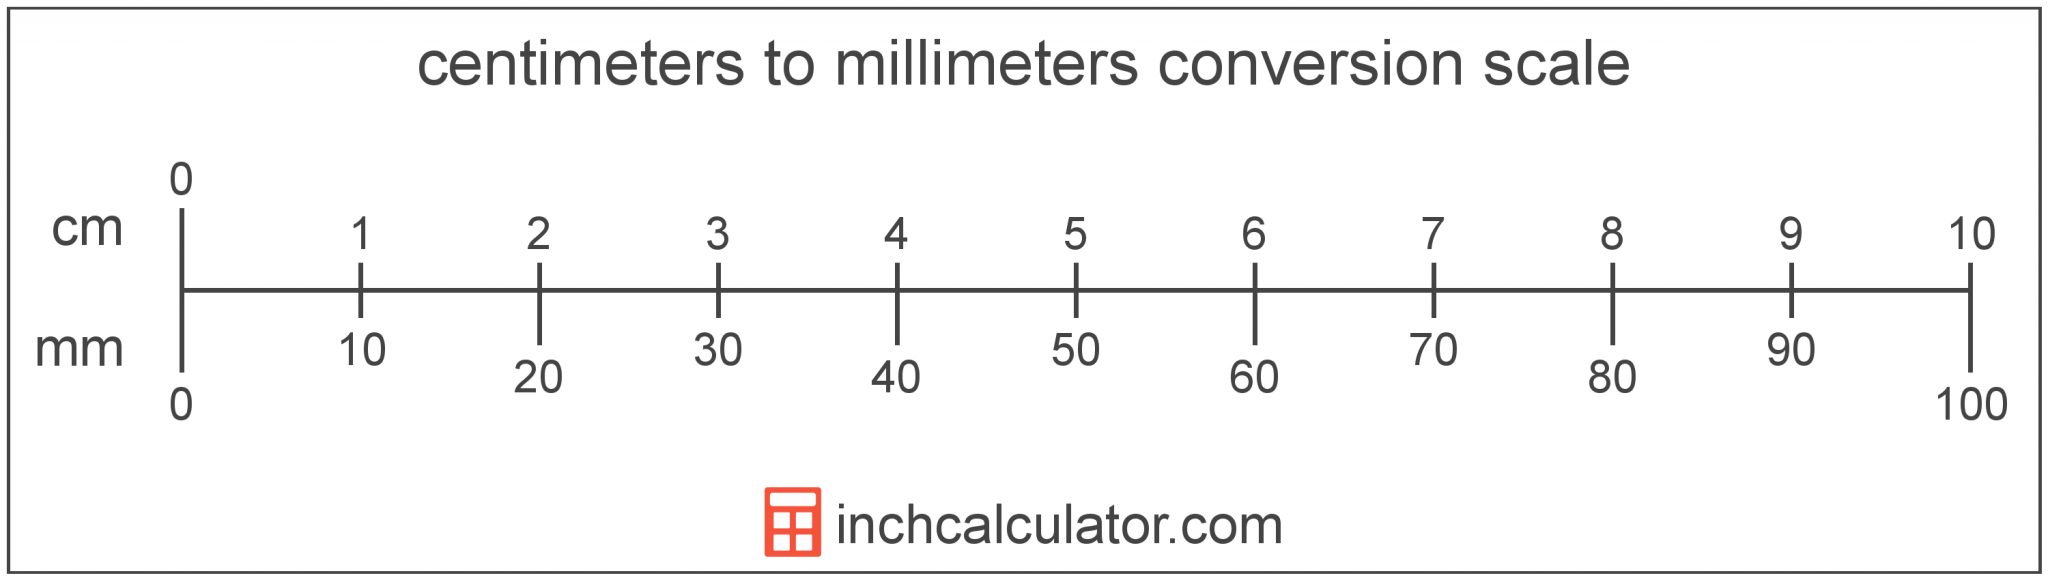 cenitmeter ruler to print to scale